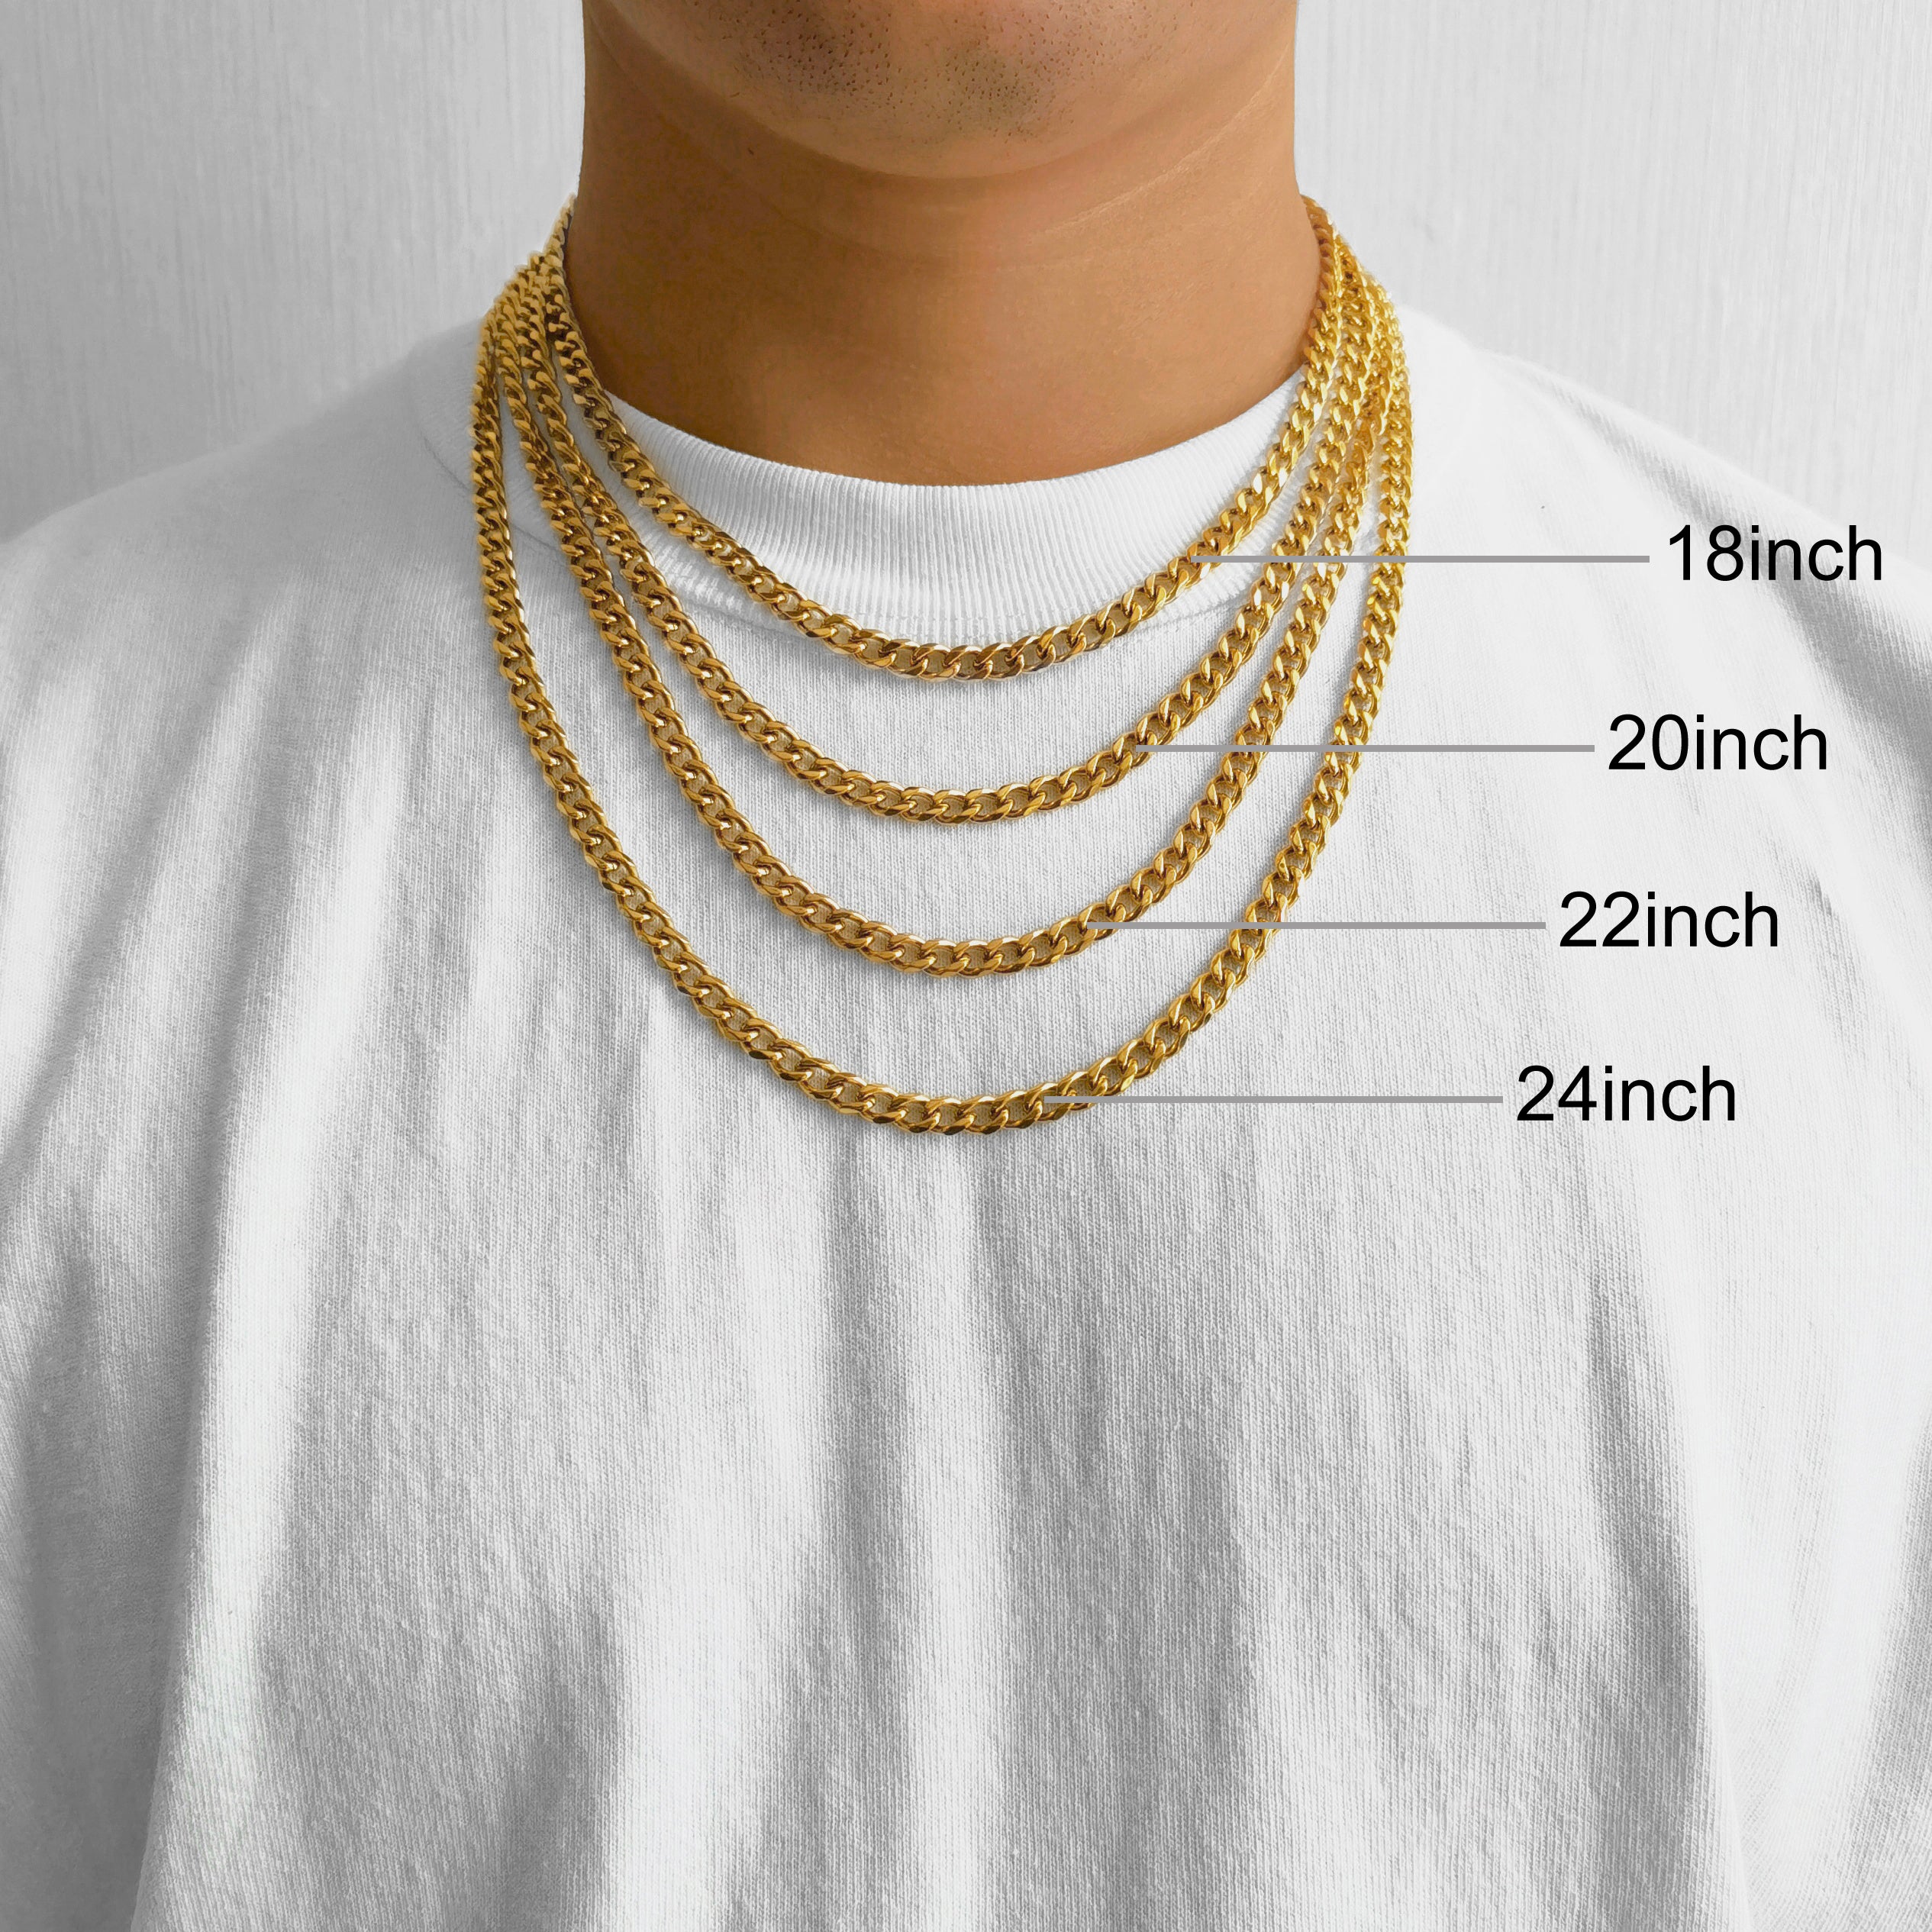 Men's 6mm Gold Plated Steel 18-24 Inch Curb Chain Necklace